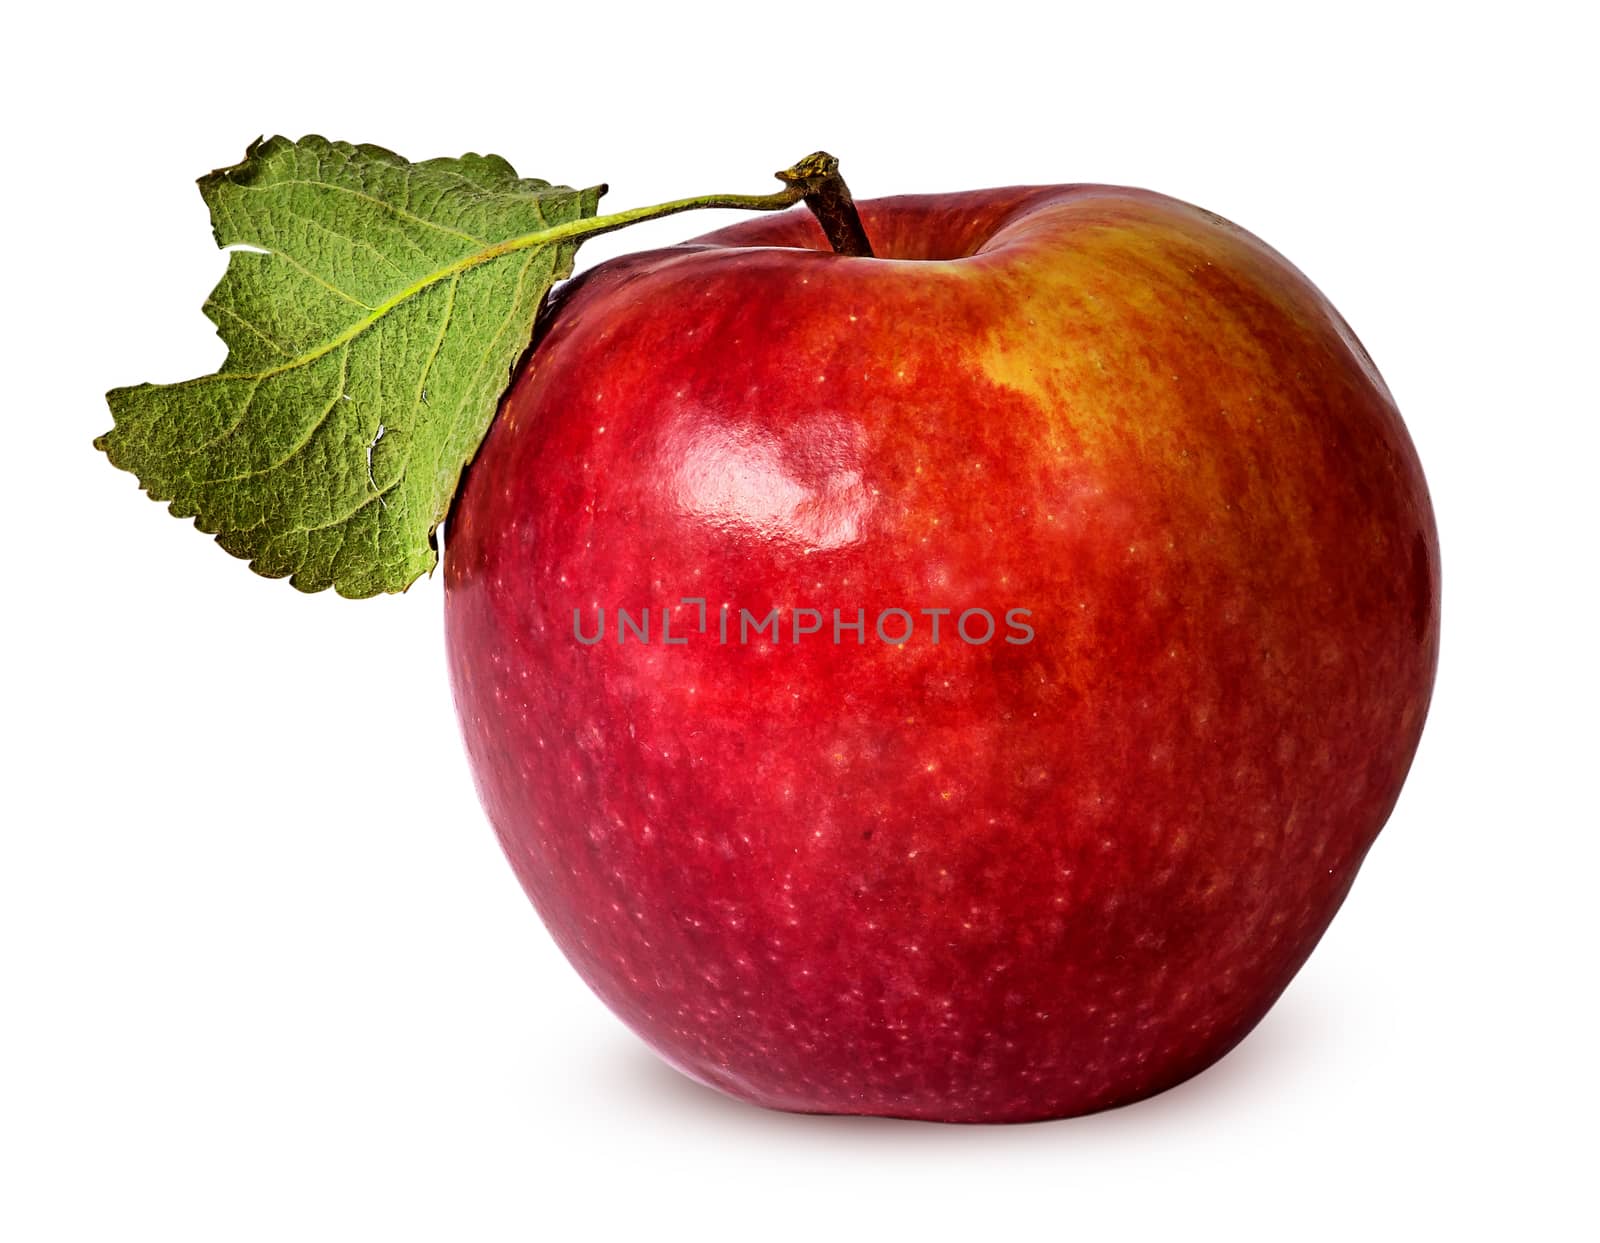 In front red ripe apple with green leaf isolated on white background